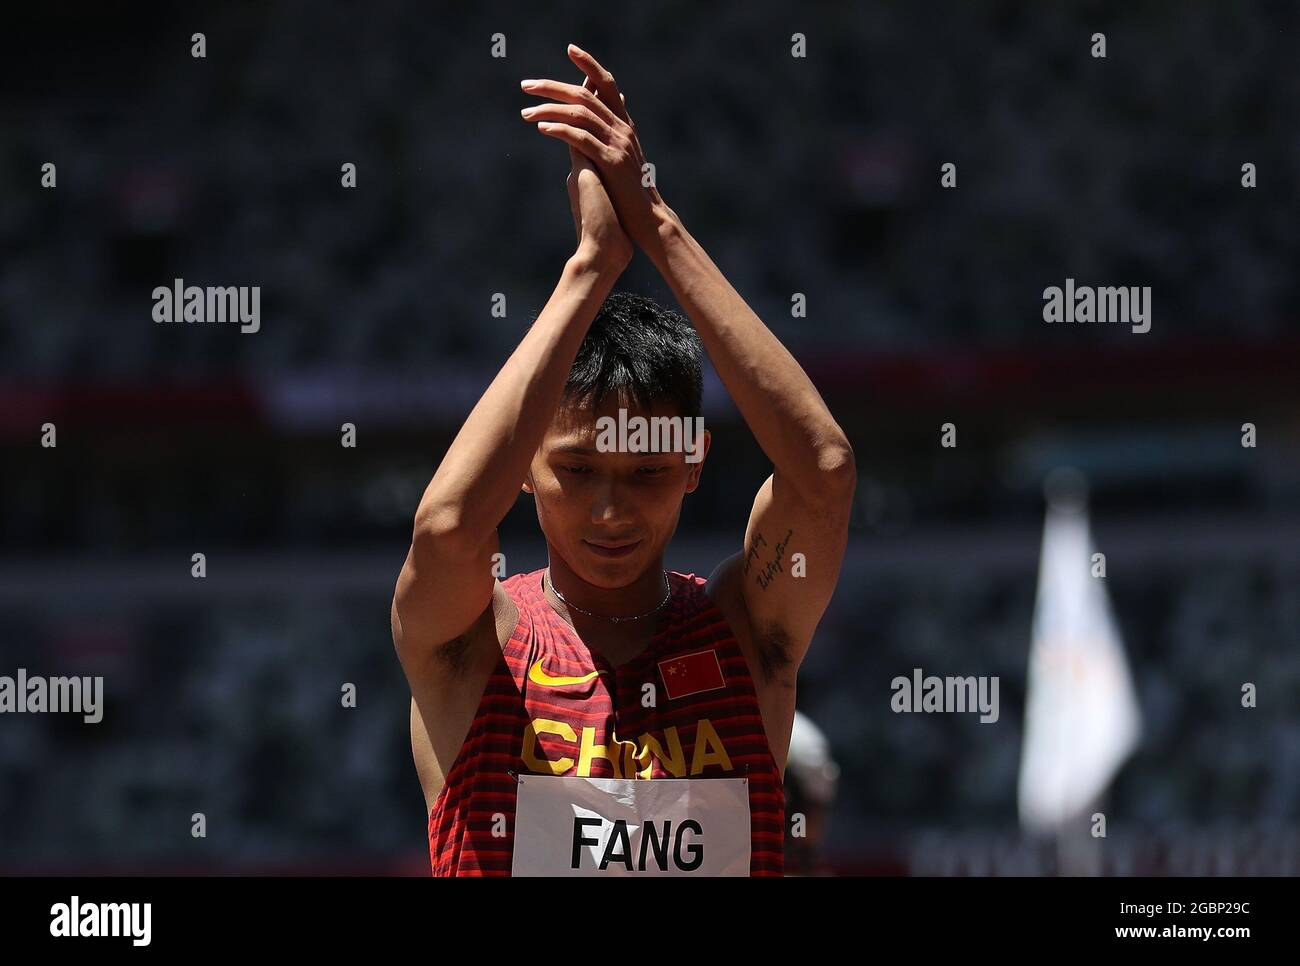 Tokyo, Japan. 5th Aug, 2021. Fang Yaoqing of China reacts during the Men's Triple Jump Final at the Tokyo 2020 Olympic Games in Tokyo, Japan, Aug. 5, 2021. Credit: Li Ming/Xinhua/Alamy Live News Stock Photo